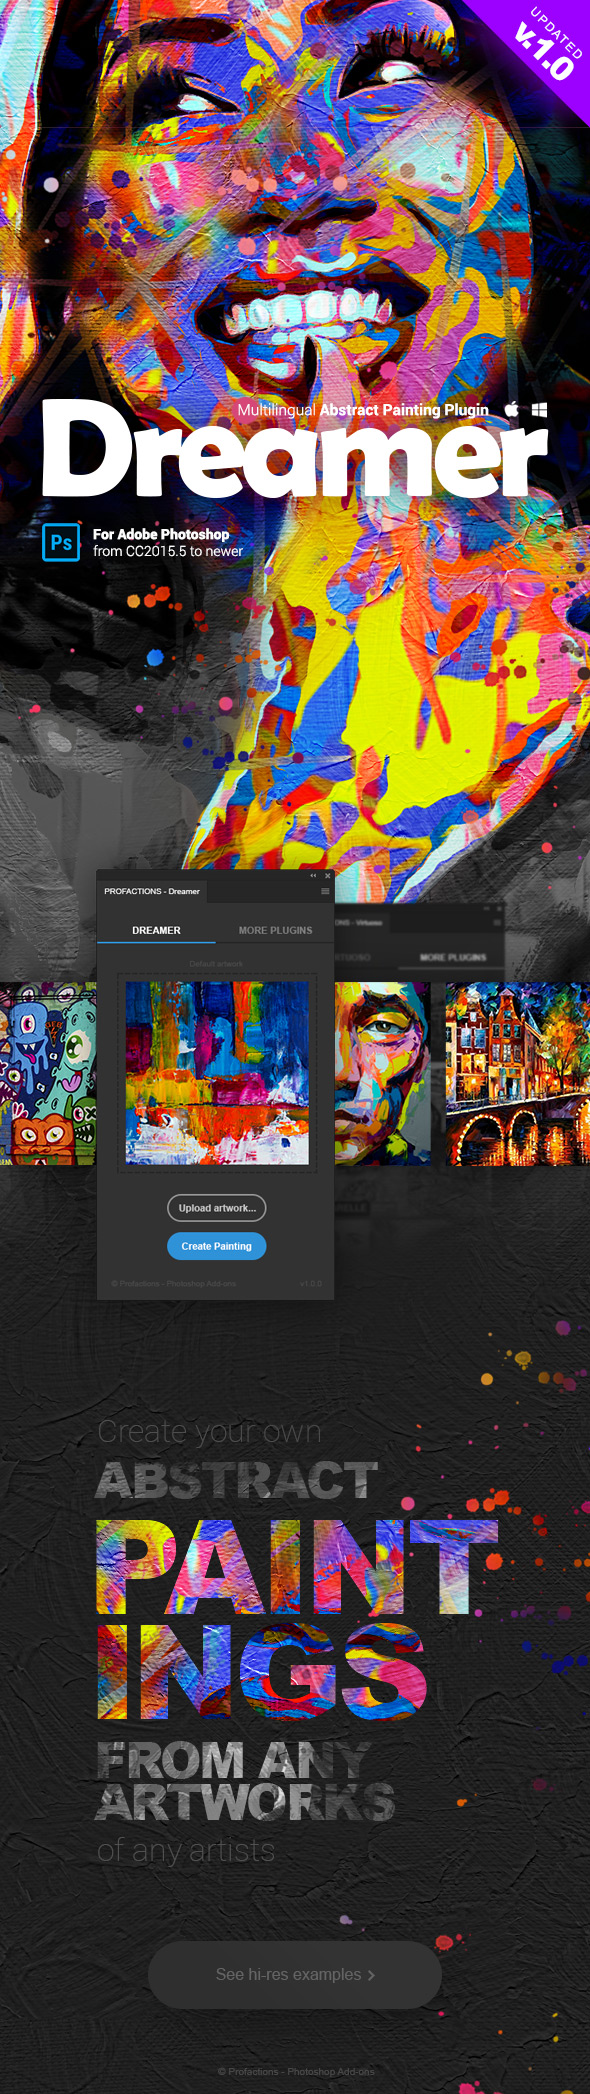 Abstract Painting Generator - Dreamer - Photoshop Plugin